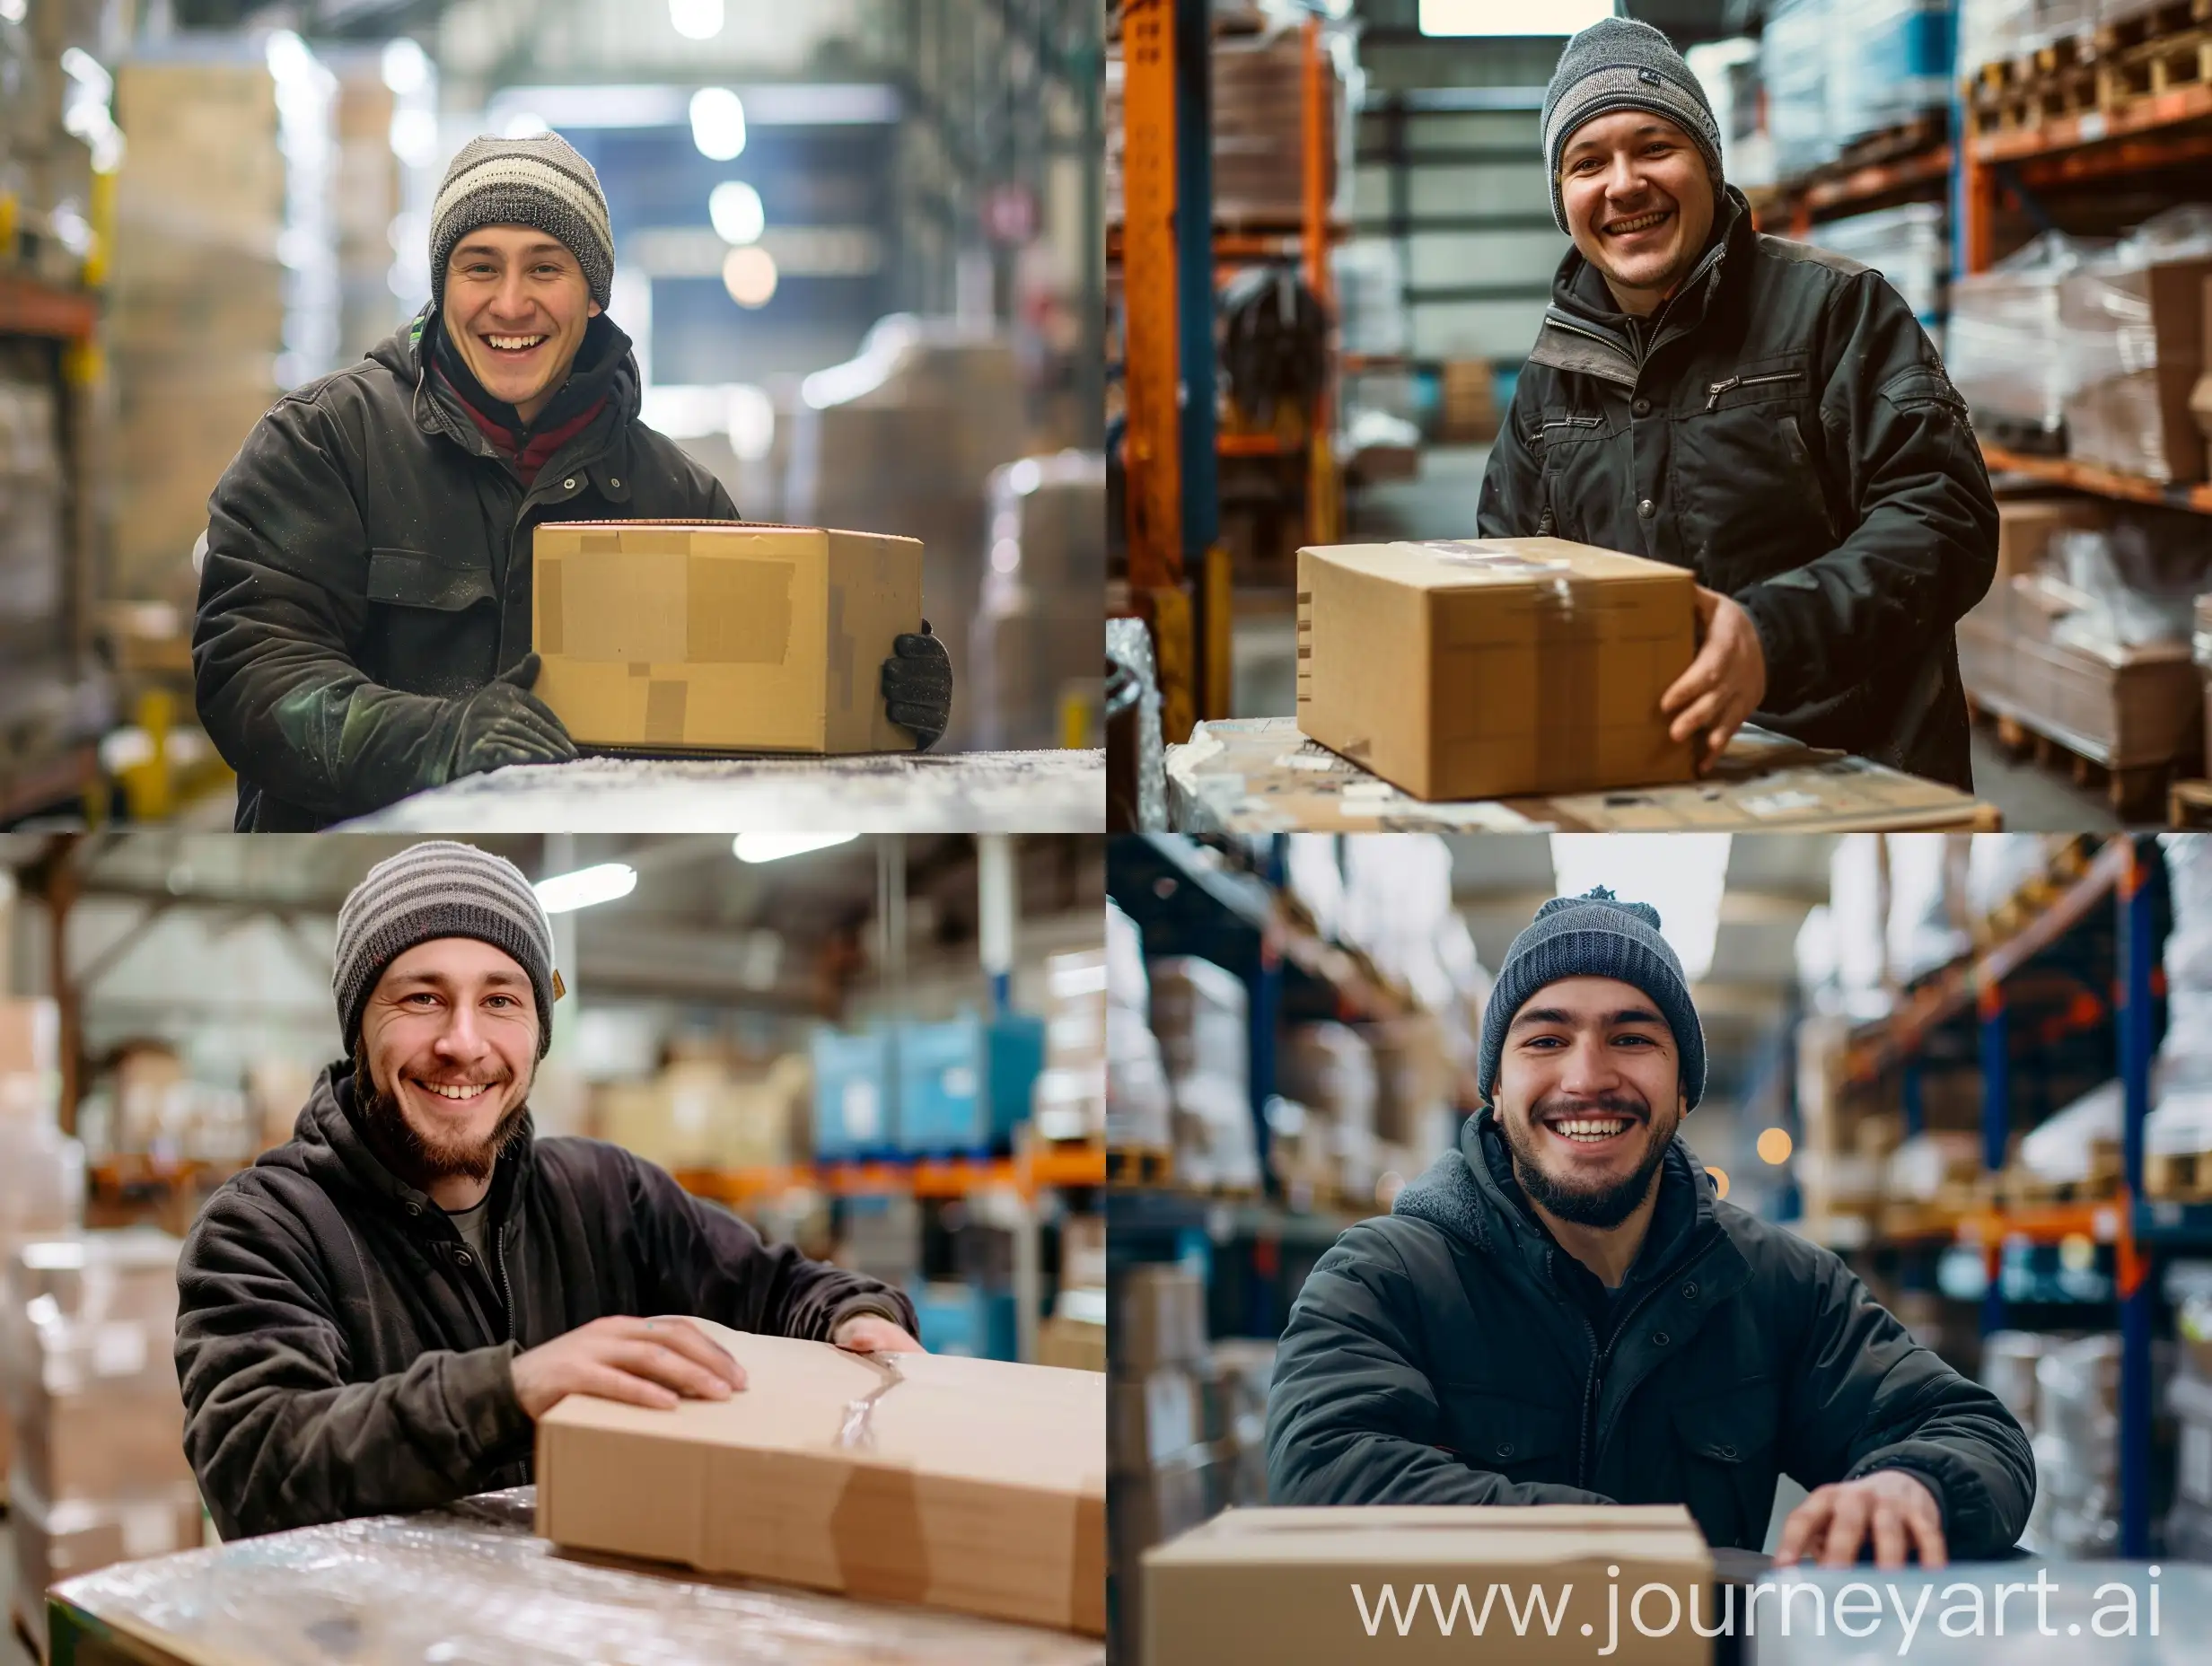 Smiling-Slavic-Warehouse-Worker-Puts-Box-on-Table